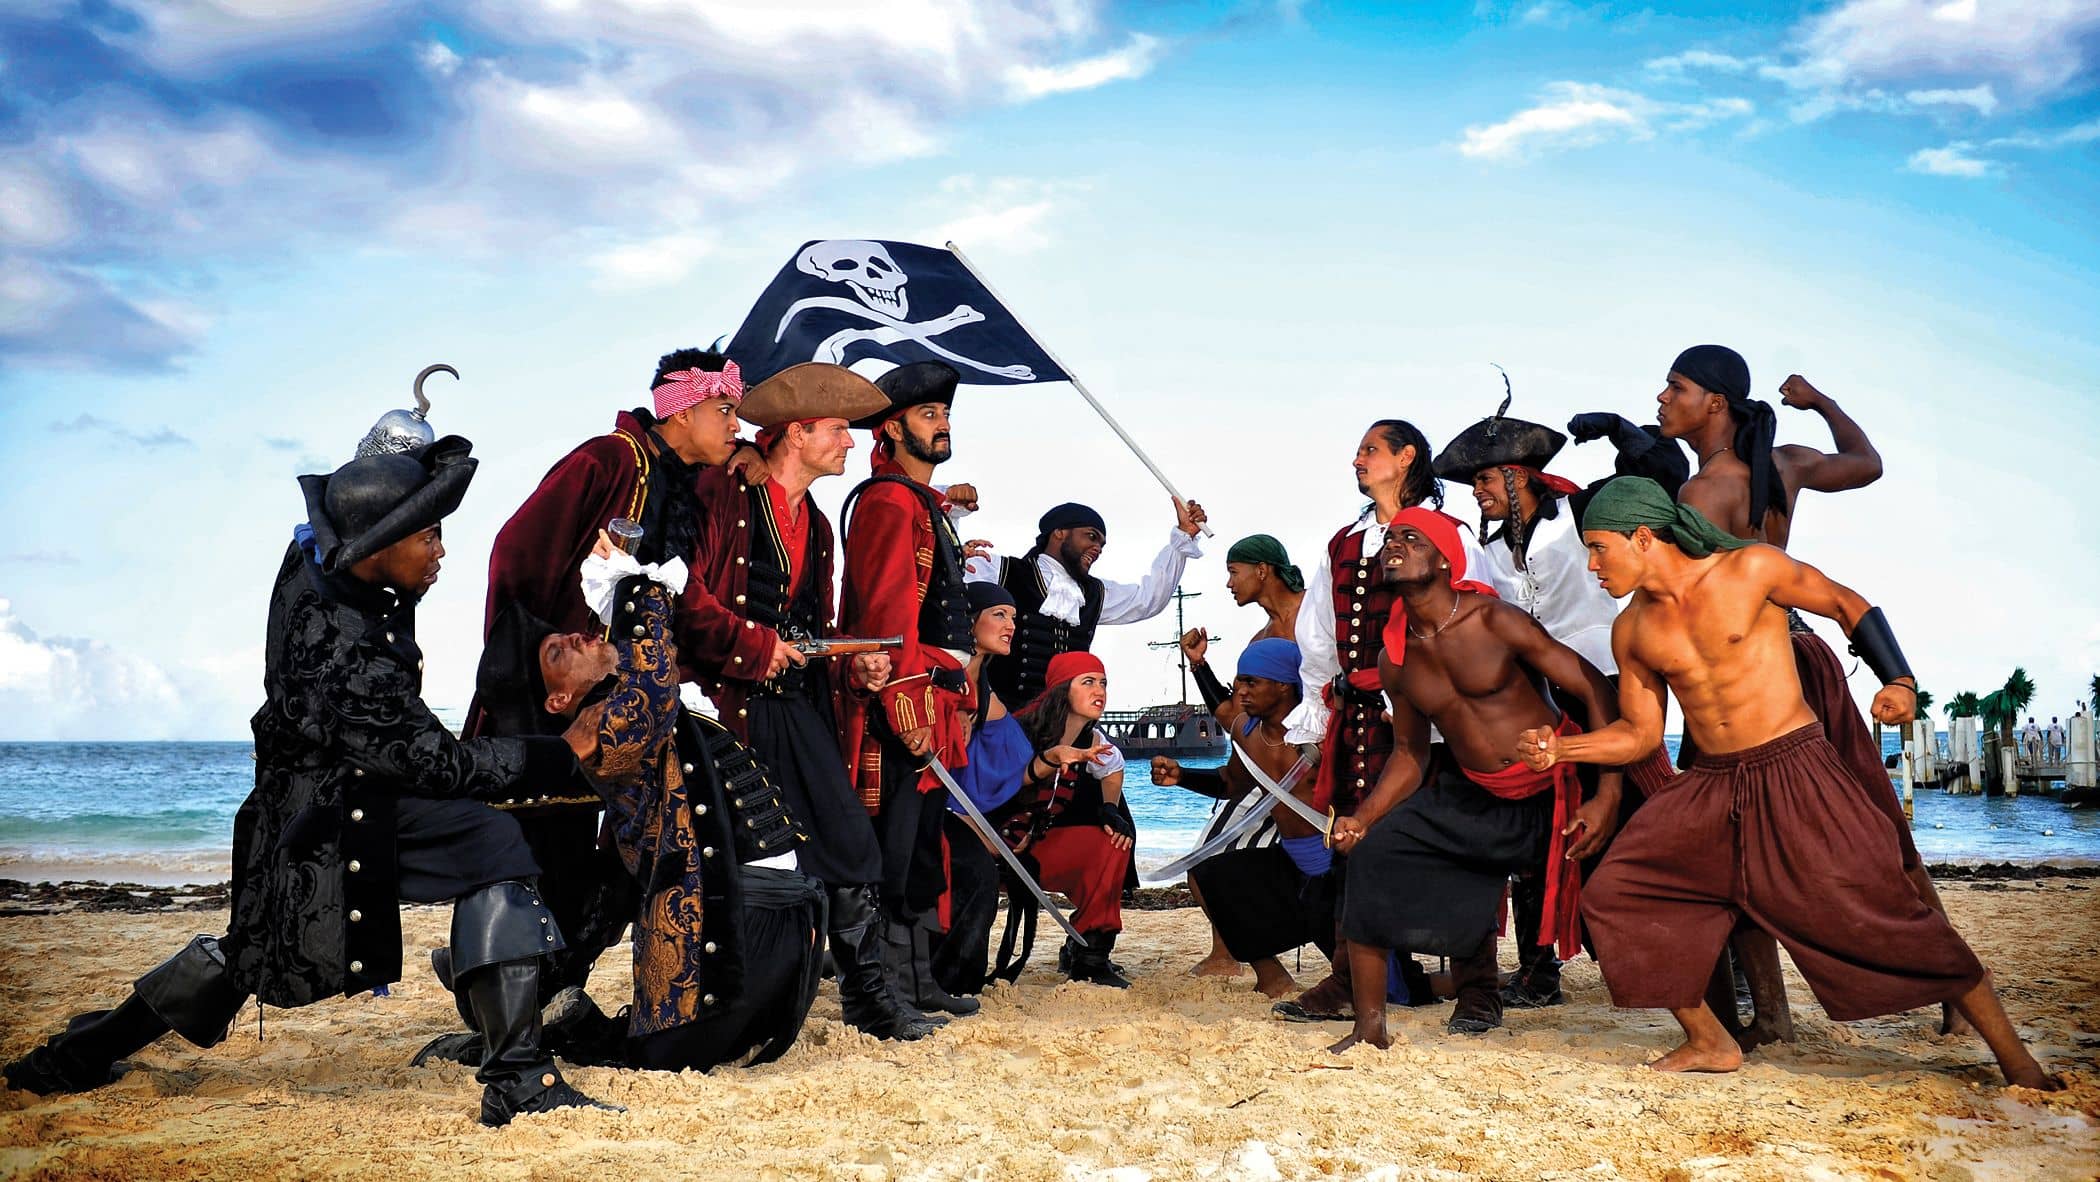 Pirate cruise and show in Punta Cana